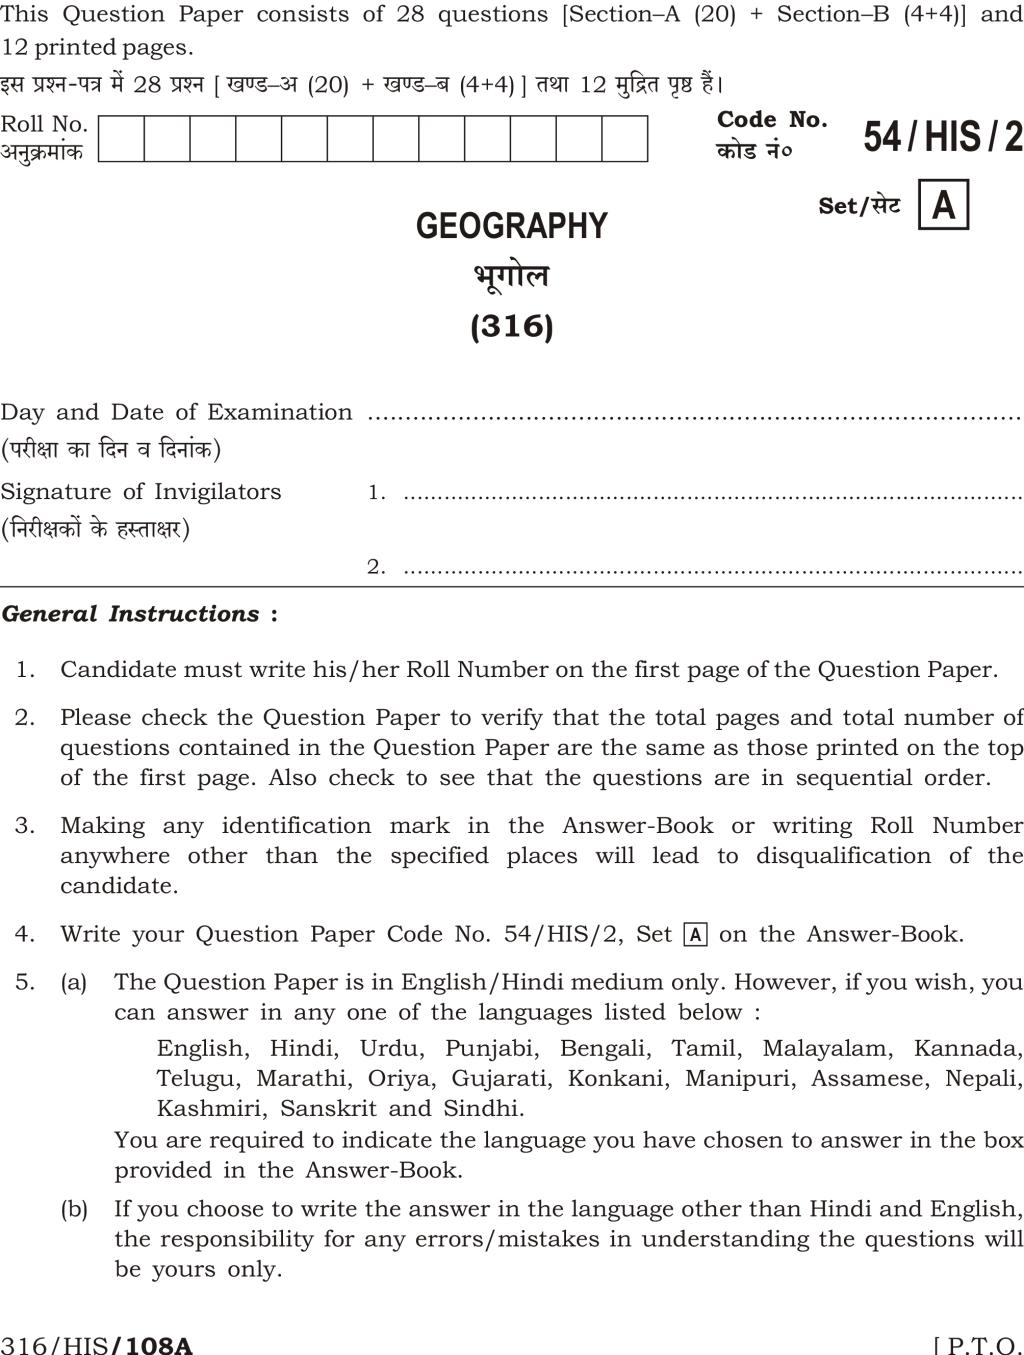 NIOS Class 12 Question Paper Apr 2017 - Geography - Page 1